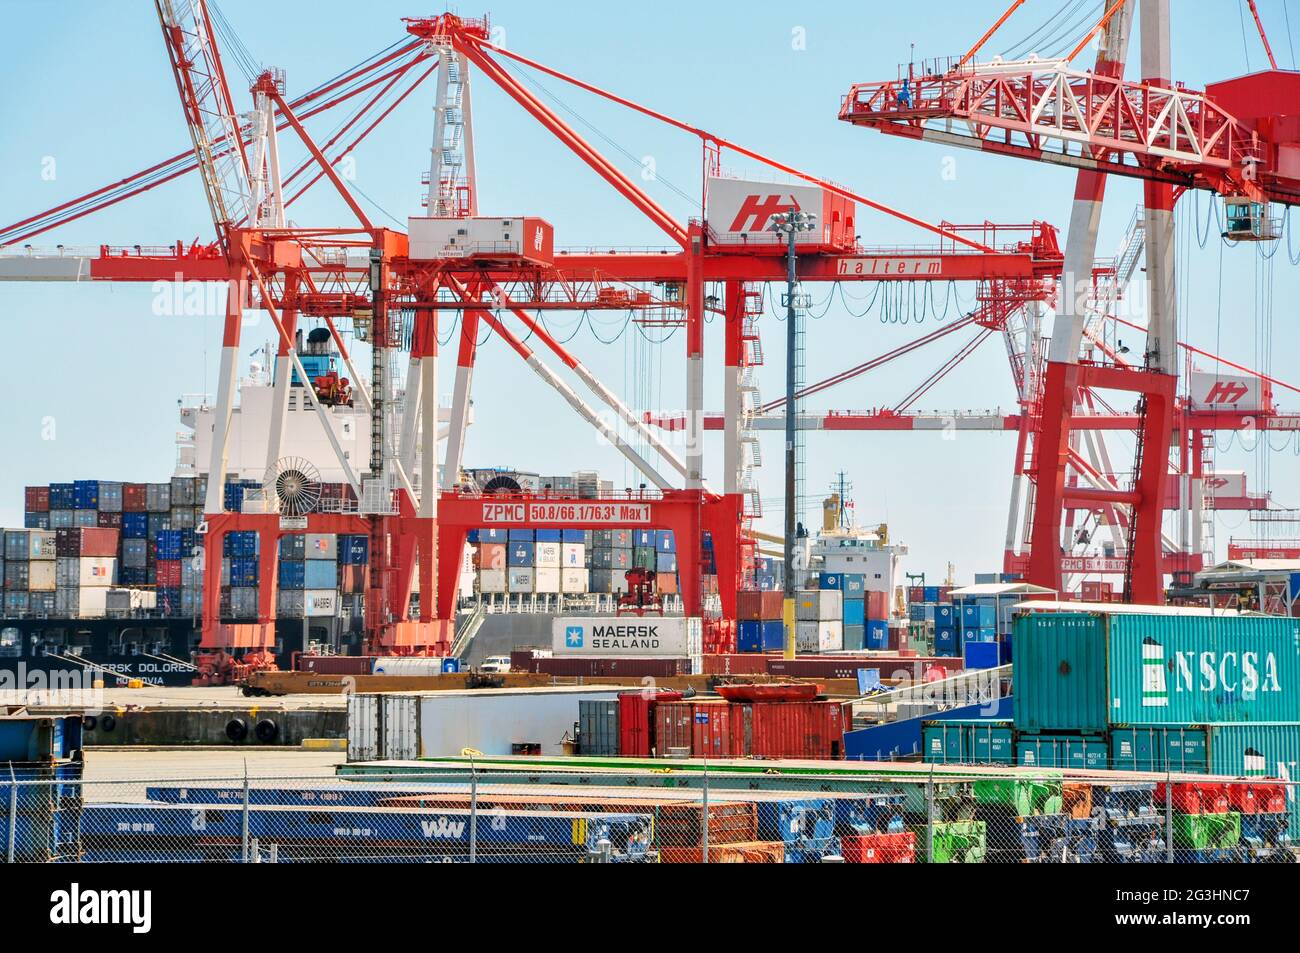 Bright, colourful, and extremely busy, the Port of Halifax has a never ending stream of containers shipping in and out from all over the world. Stock Photo